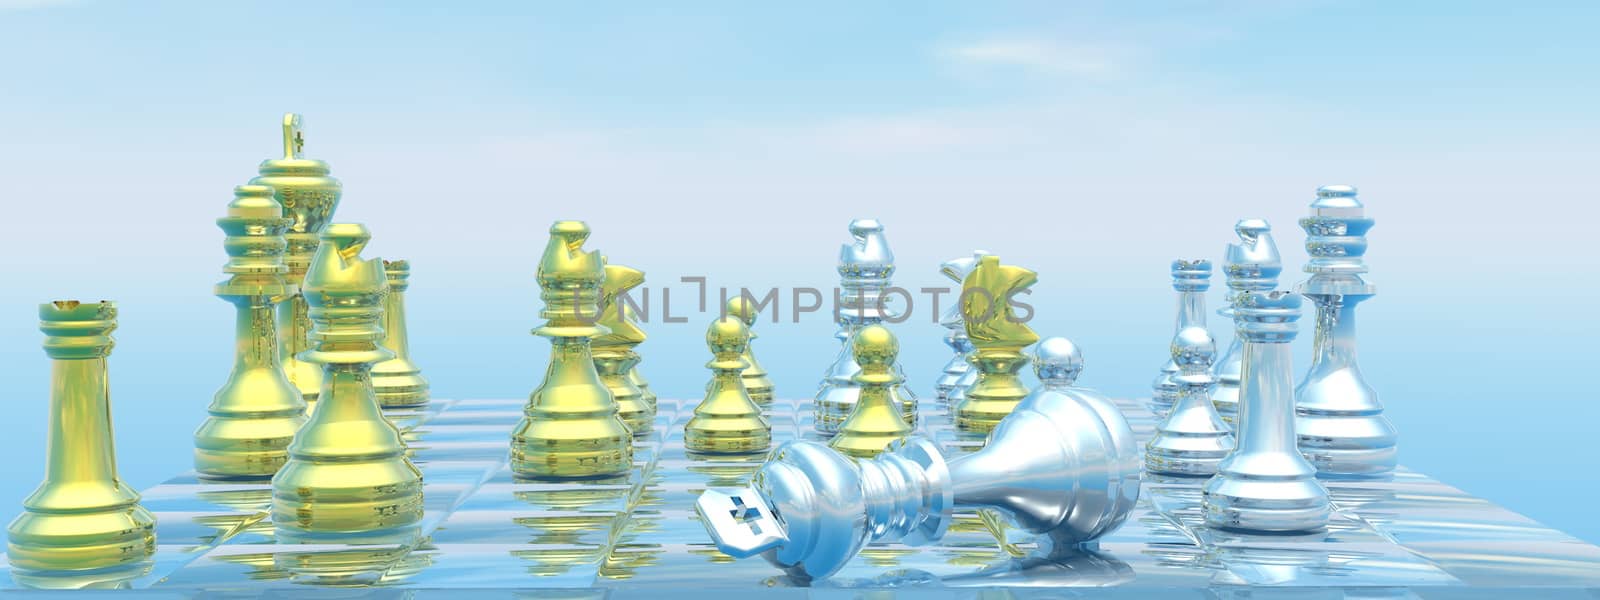 Checkmate - 3D render by Elenaphotos21